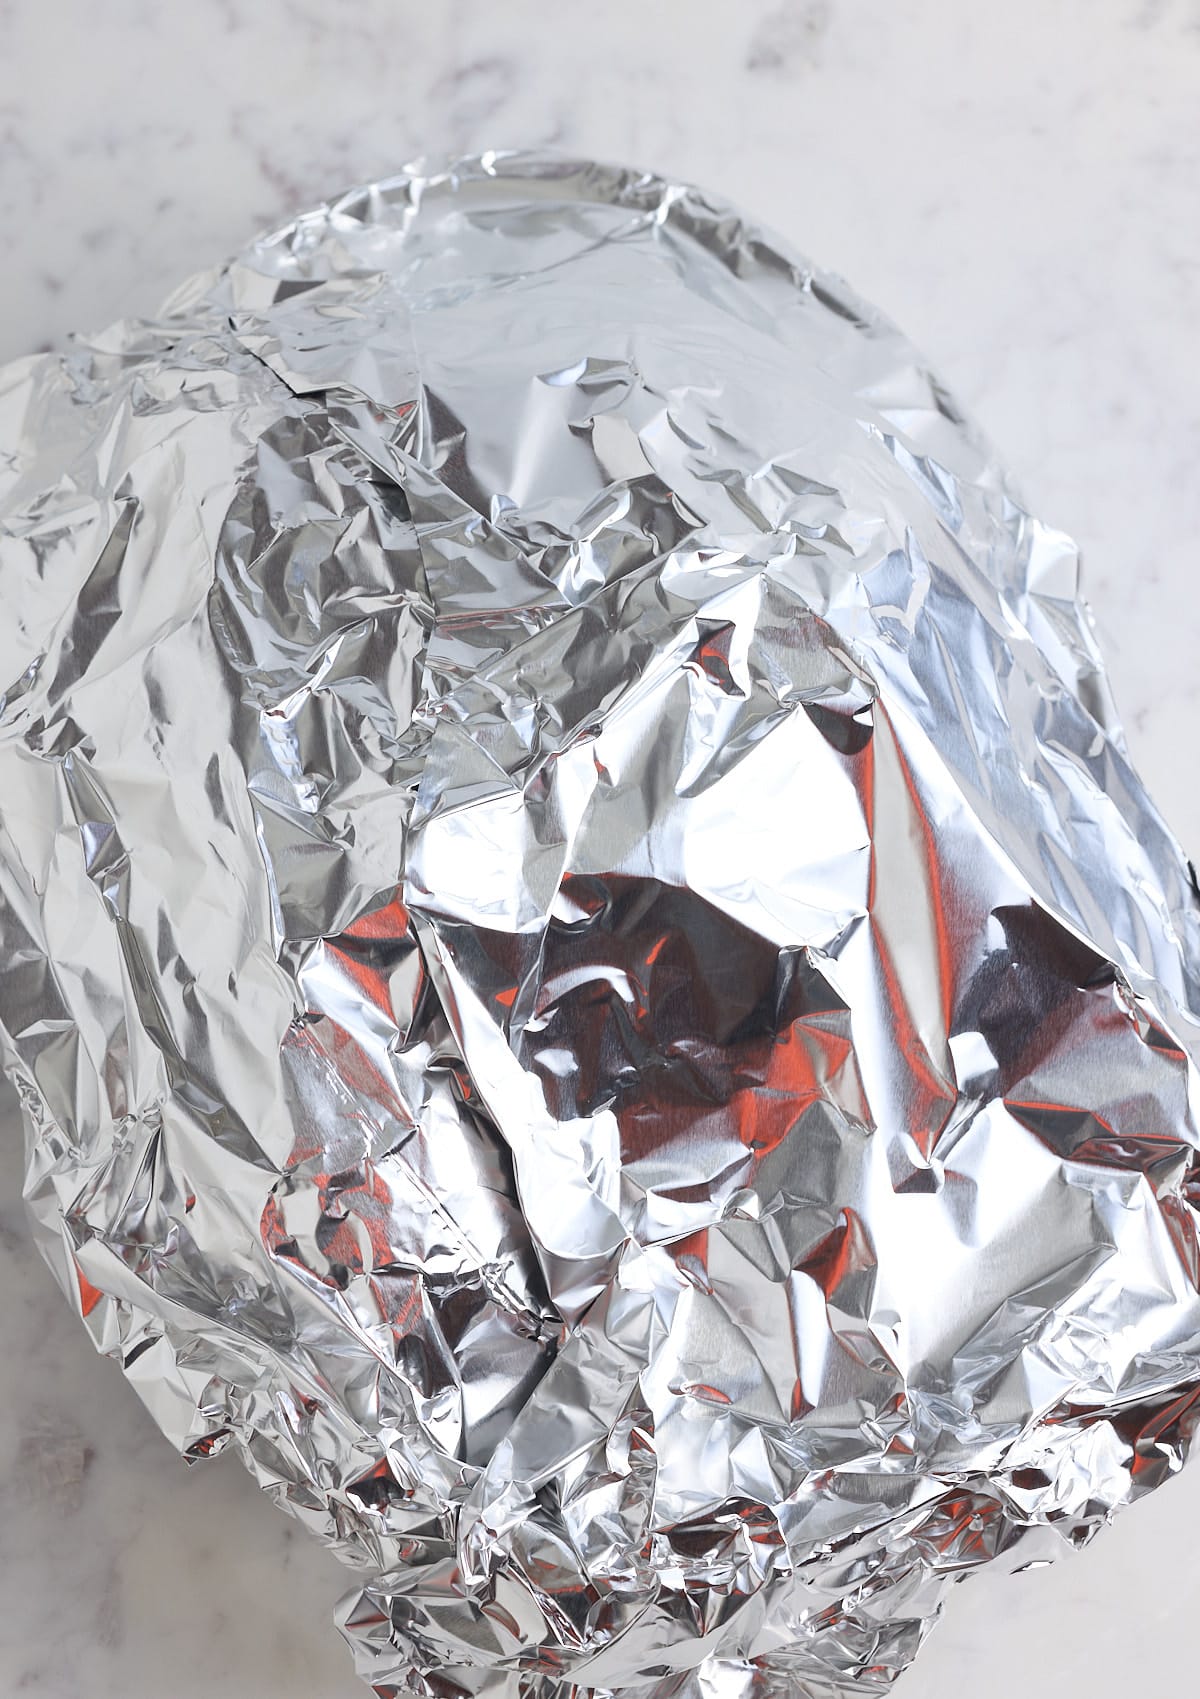 The dish is covered in foil.